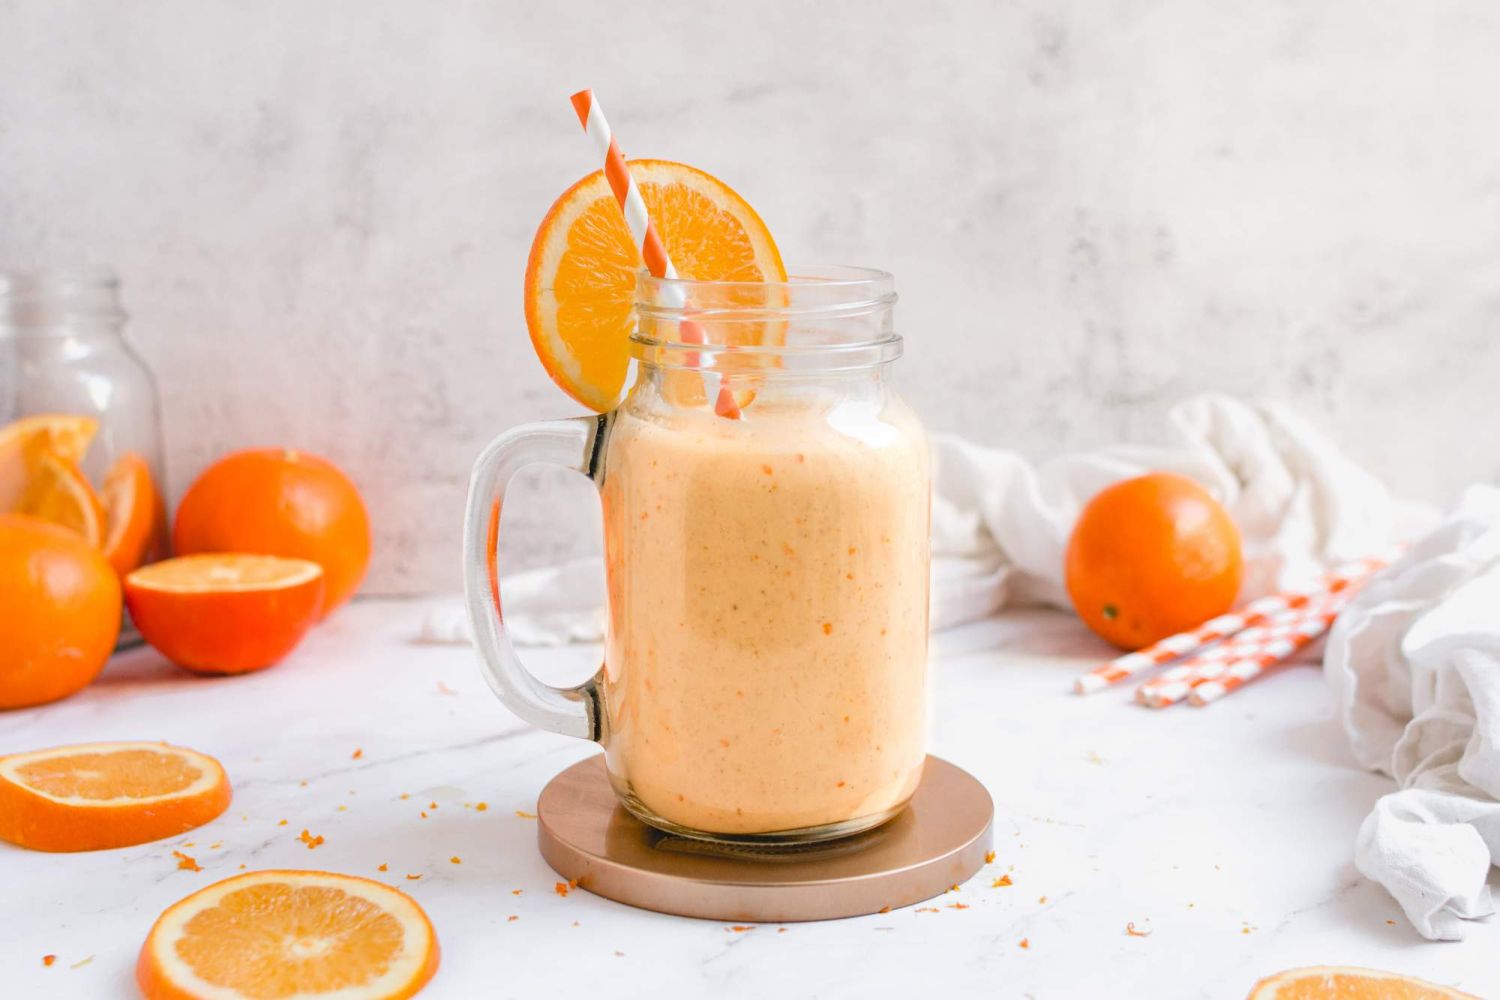 Orange creamsicle smoothie with sliced oranges and bananas in a glass.